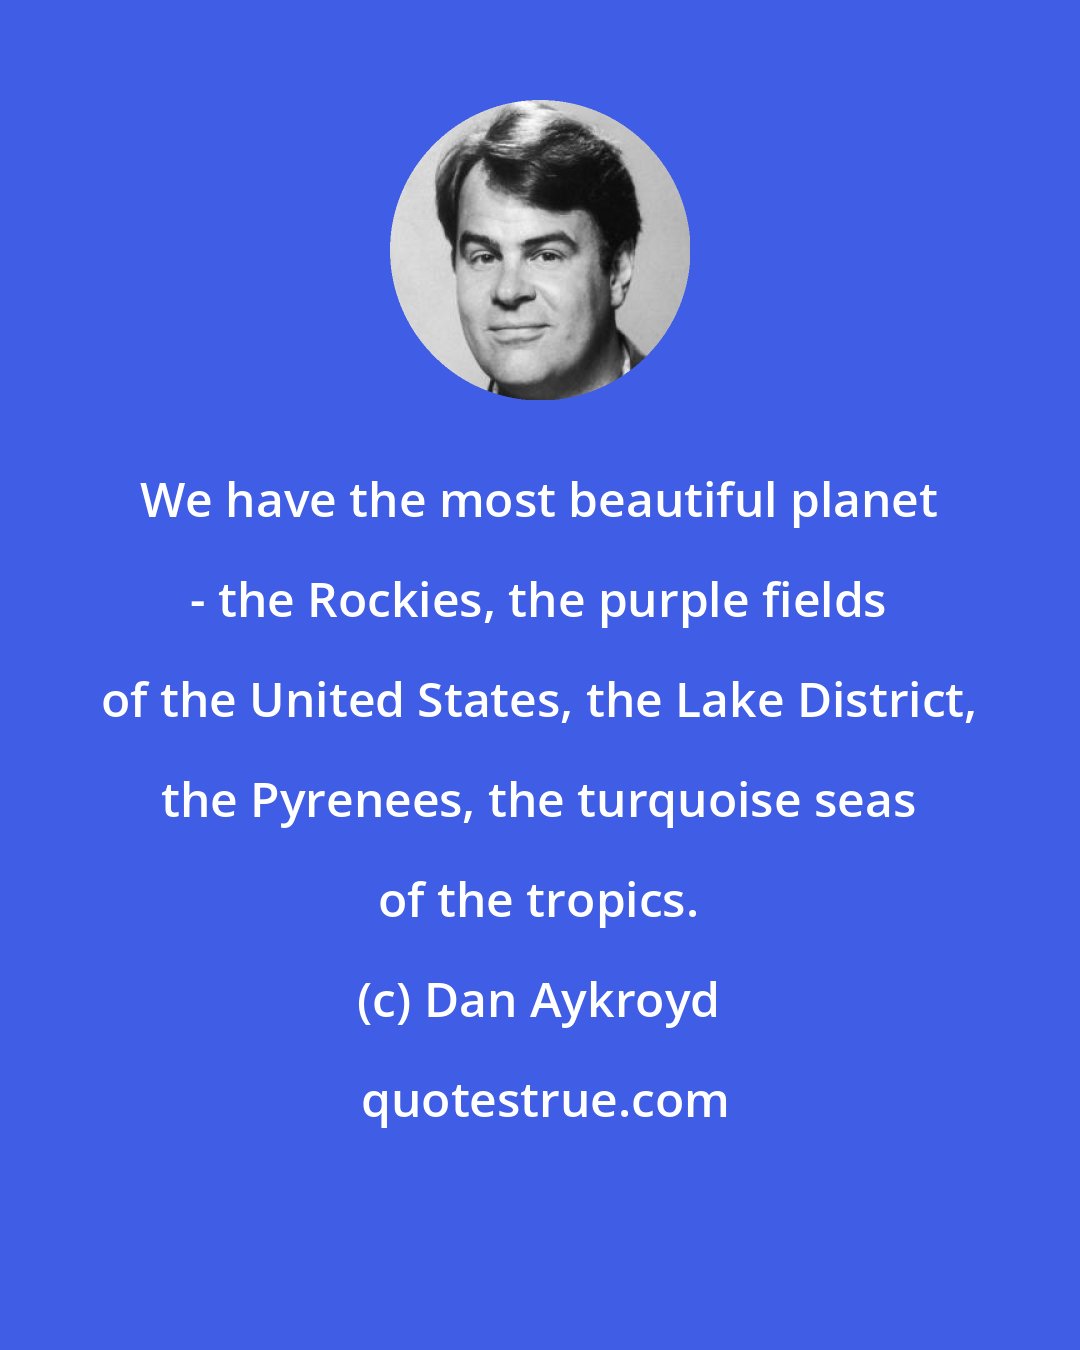 Dan Aykroyd: We have the most beautiful planet - the Rockies, the purple fields of the United States, the Lake District, the Pyrenees, the turquoise seas of the tropics.